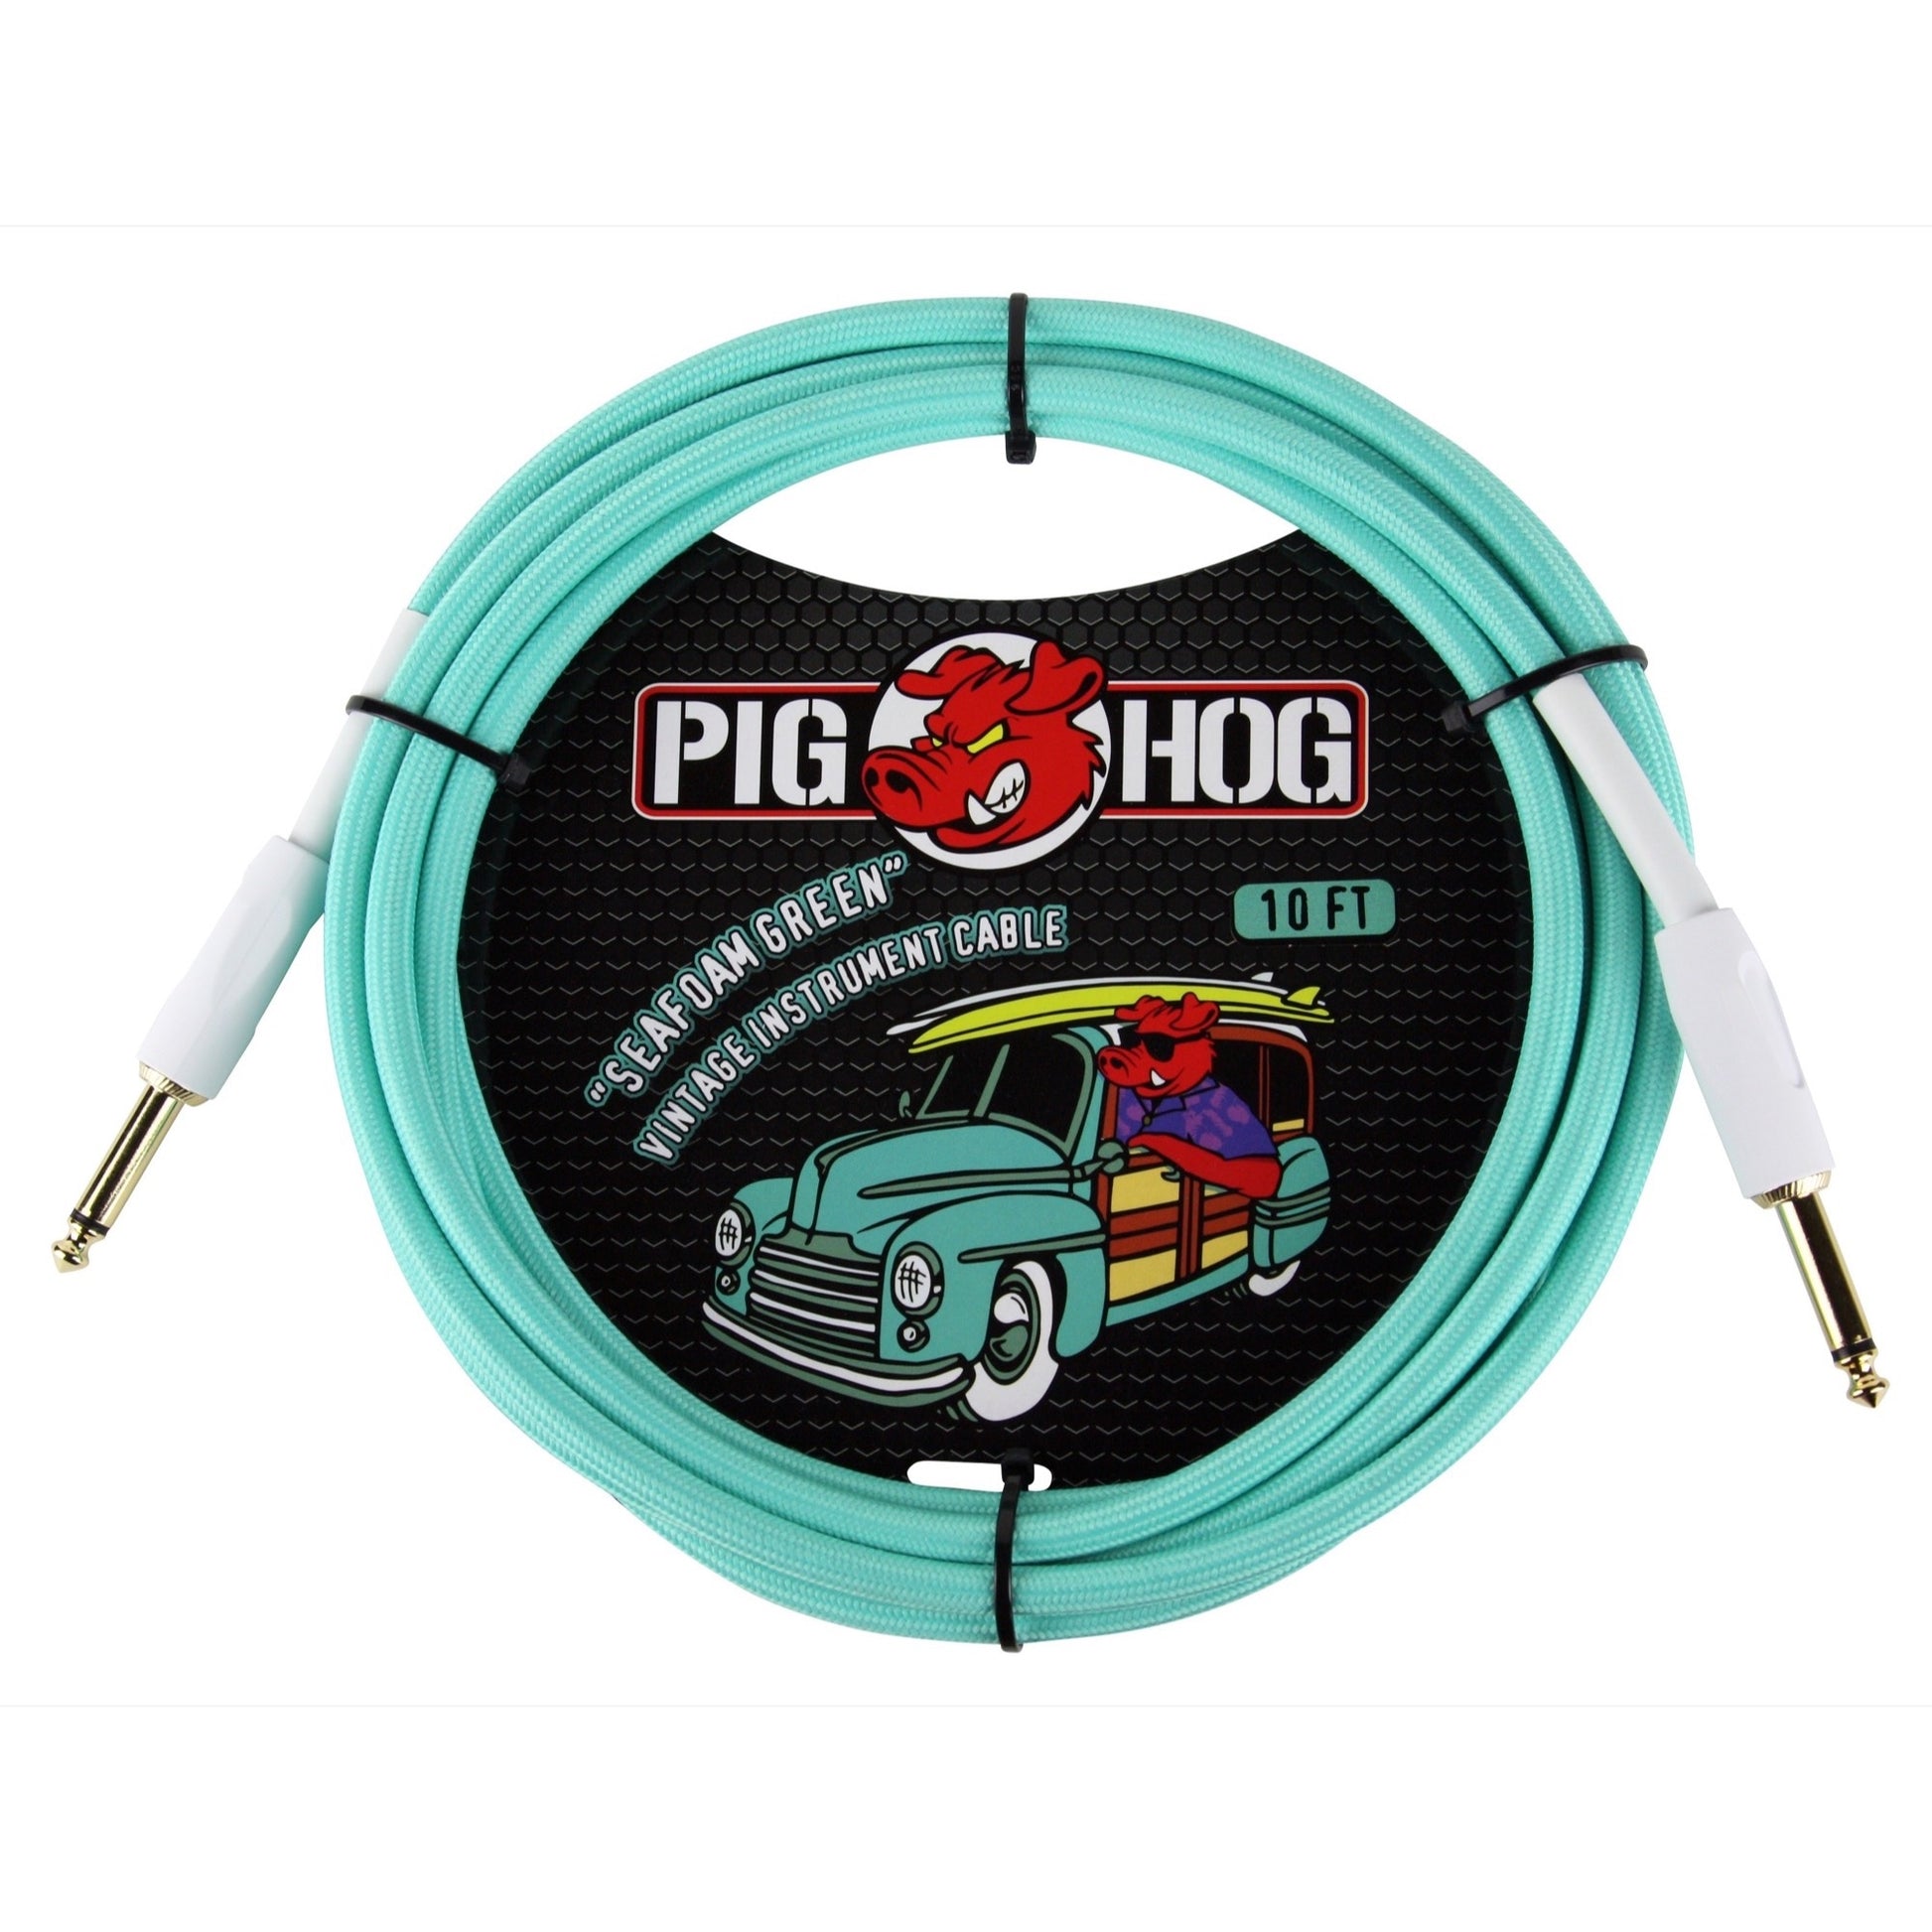 Pig Hog Vintage Series Instrument Cable, 1/4 Inch Straight to 1/4 Inch Straight, Seafoam Green, 10 Foot